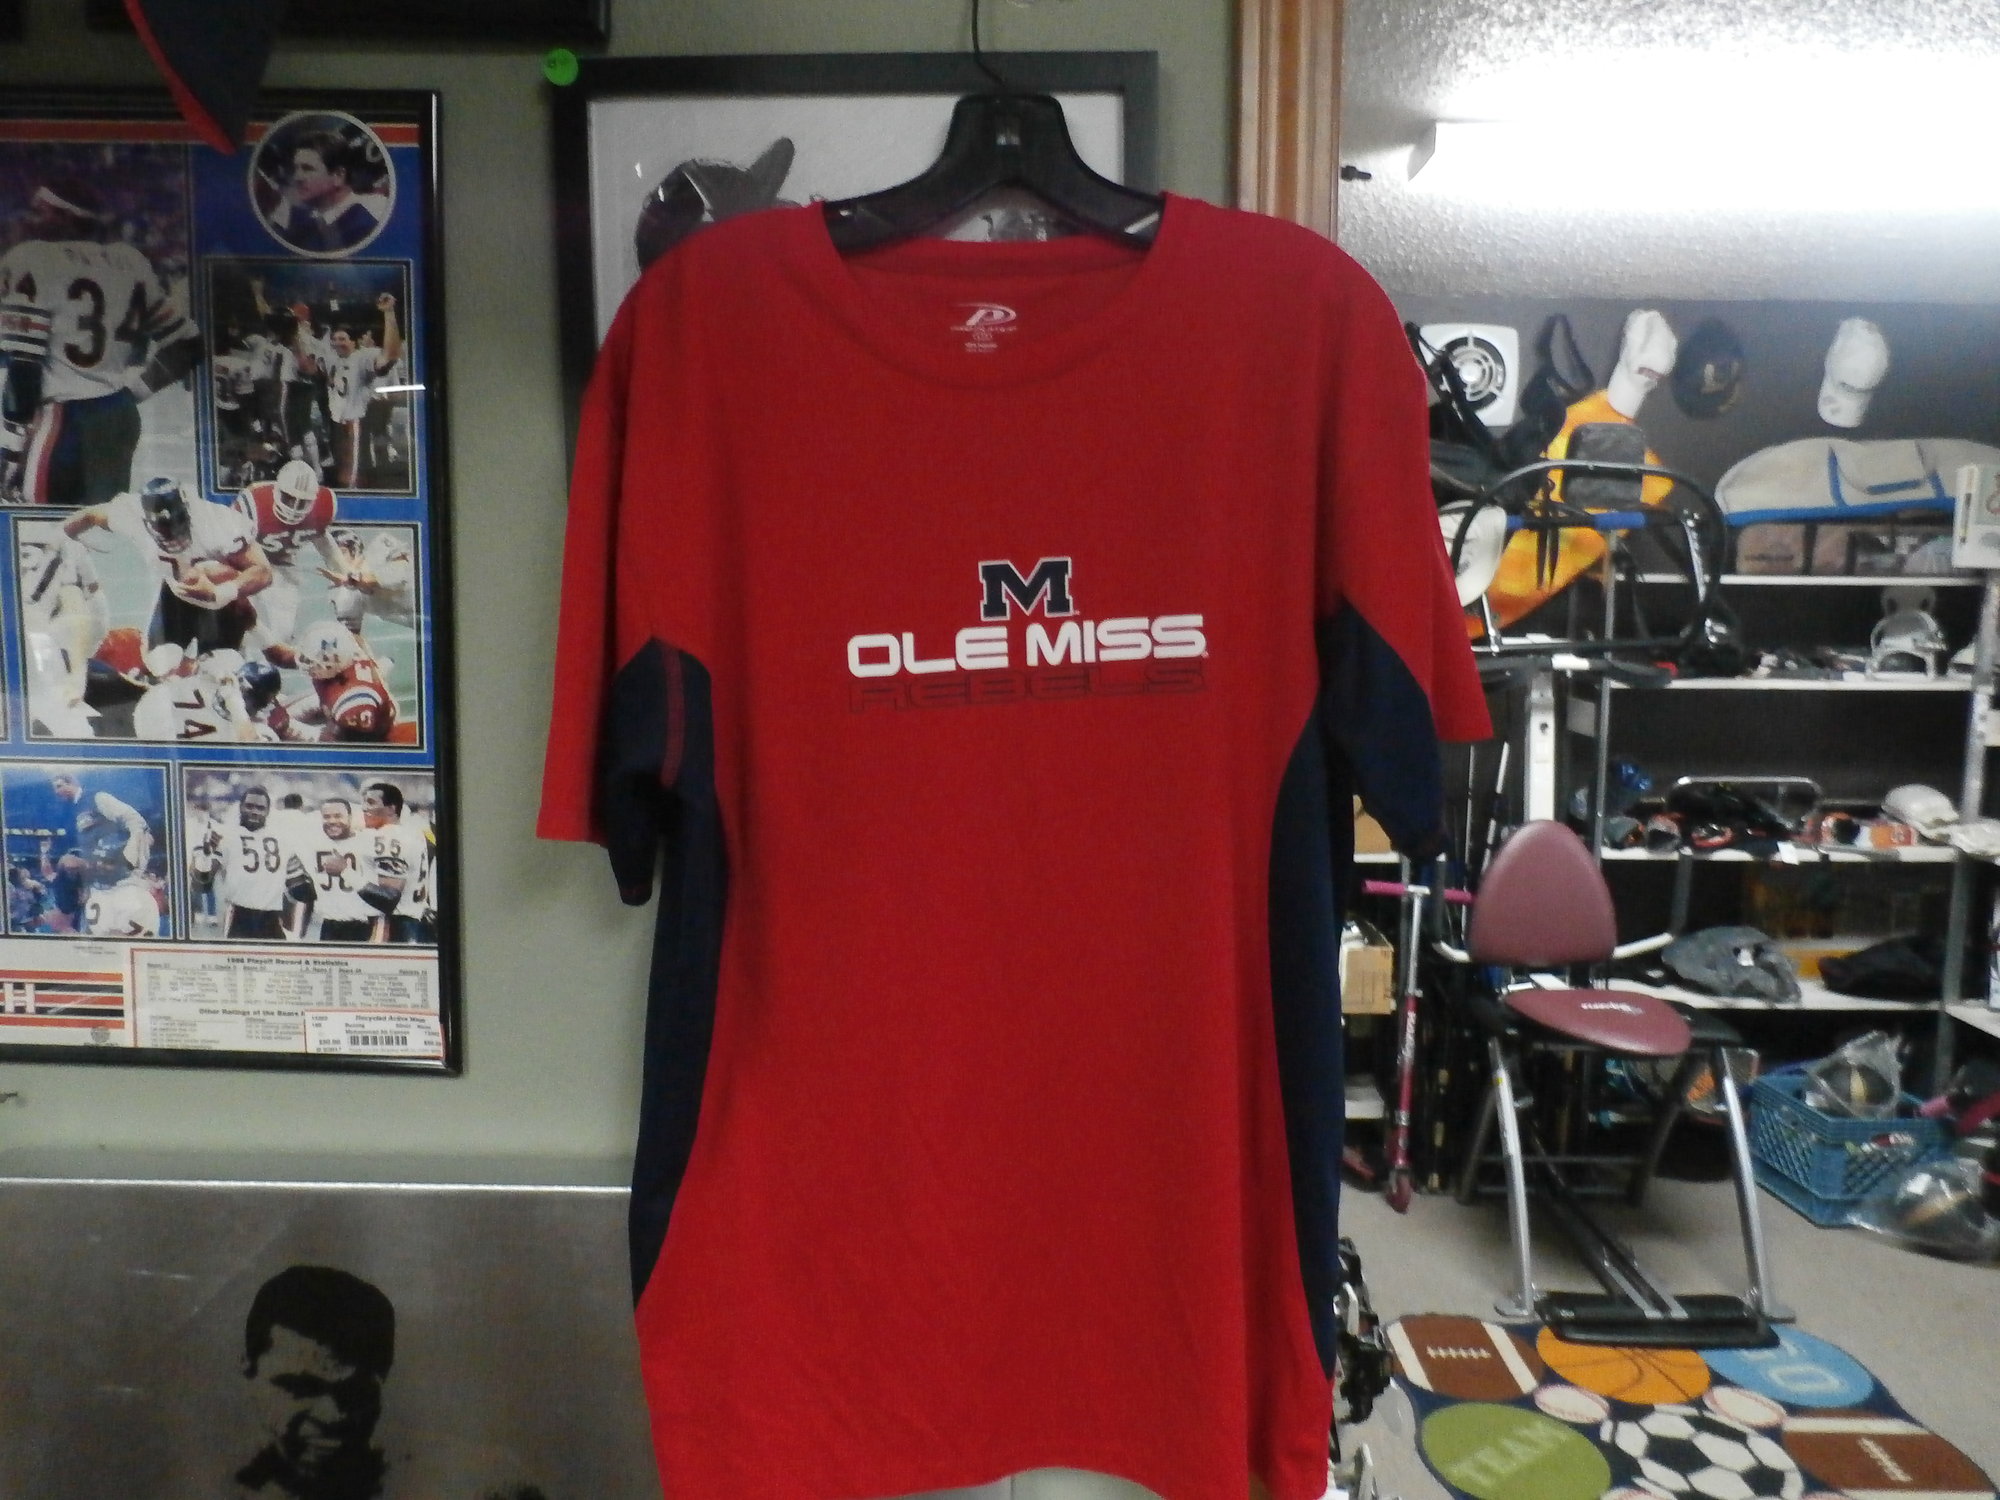 Pro Player Ole MIss Rebels Men's Red size Large 100% polyester  #17012
Rating:   (see below) 3- Good Condition
Team:Ole MIss Rebels
Player: Team
Brand: Pro Player
Size: Large - Men's (Measured Flat: Across chest 22\", length 28\")
Measured flat: armpit to armpit; top of shoulder to the hem
Color: Red
Style: Short sleeve
Material: 100% Polyester
Condition: - 3- Good Condition - Wrinkled;minor snags; minor pilling; fuzz on material;
Item #: 17012
Shipping: $3.37